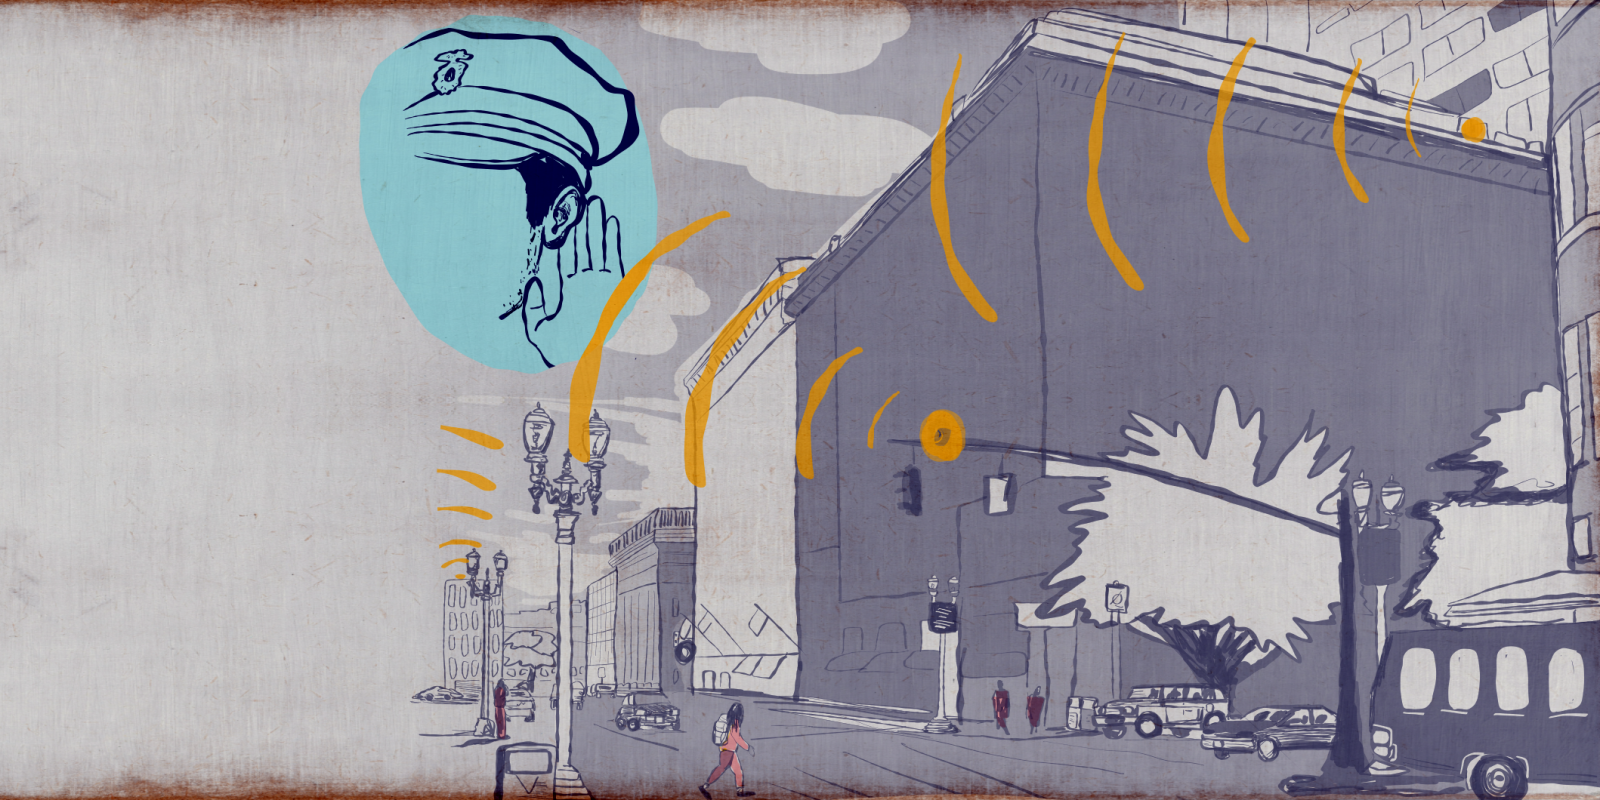 illustrated image of a downtown city with microphones surveilling the sounds from the streets -- the outline of a police officer has his hand to his ear, listening to the transmissions